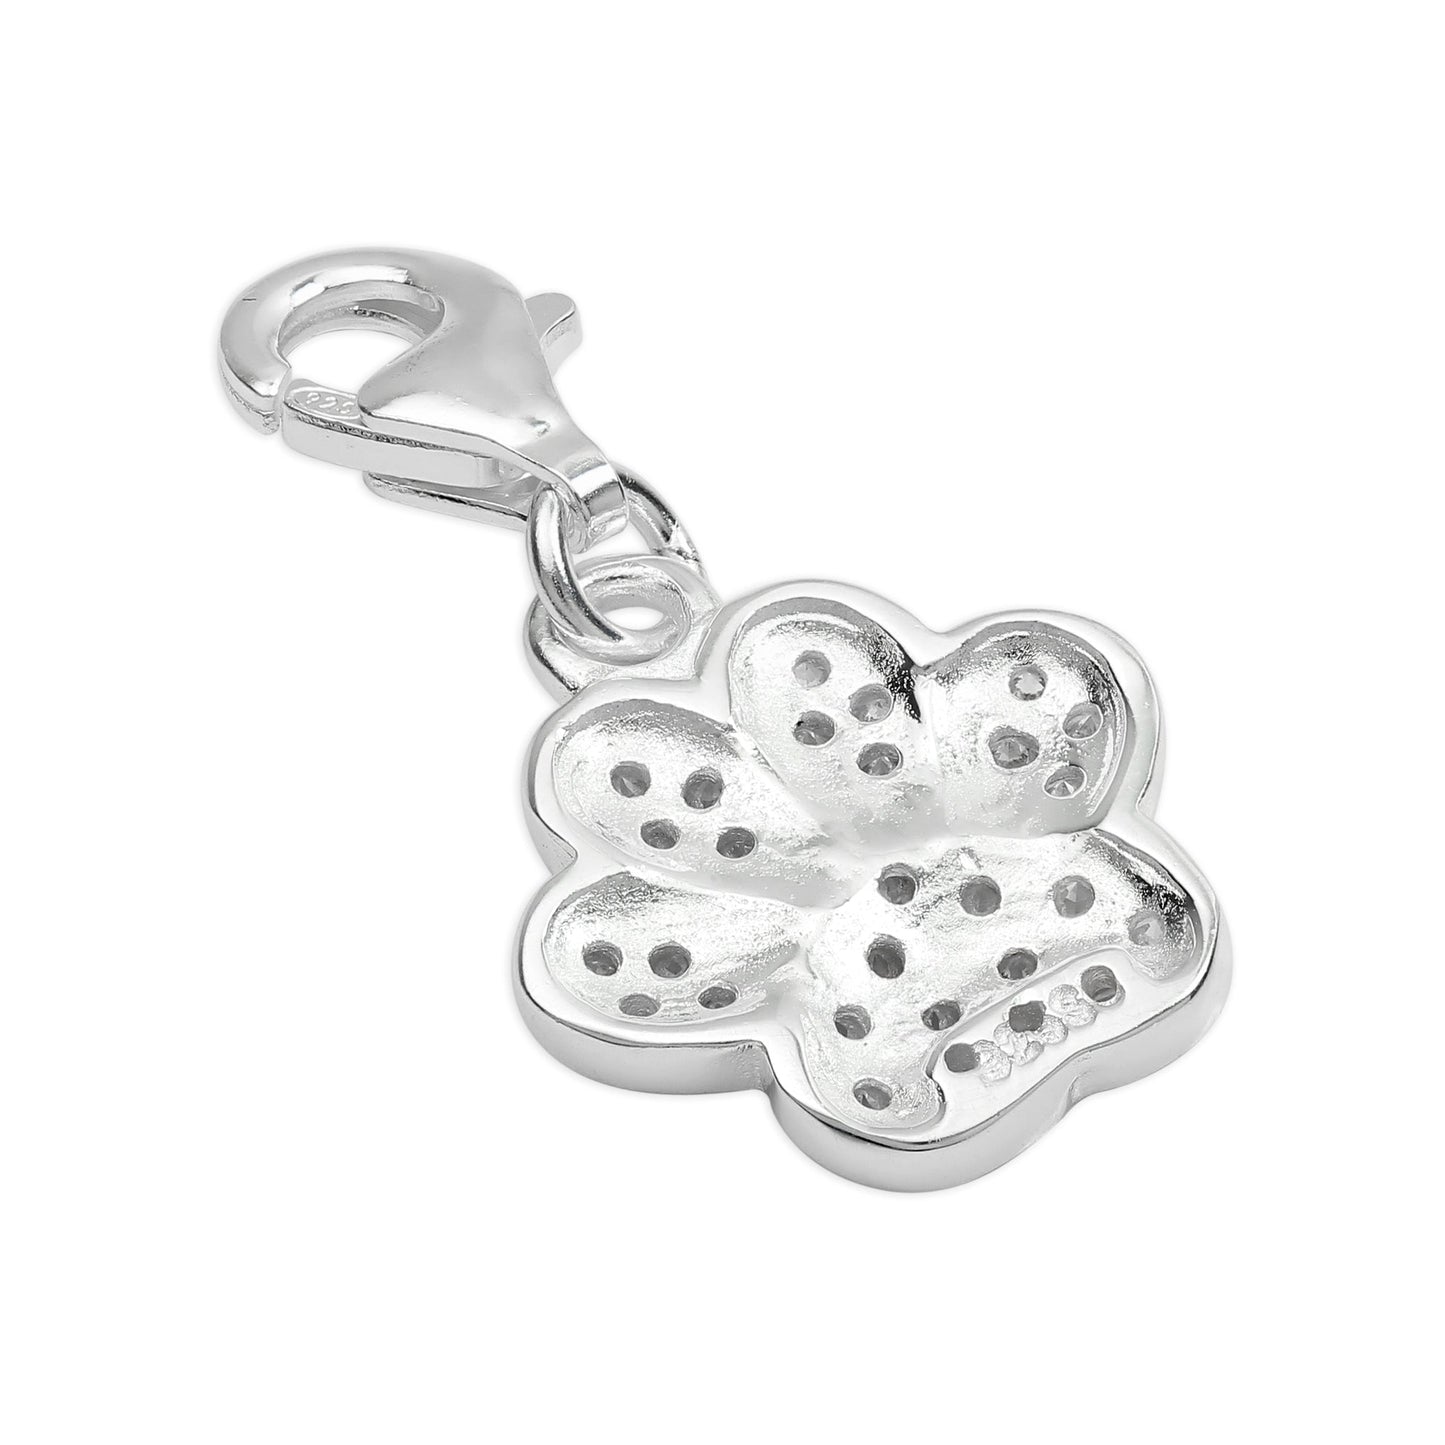 Sterling Silver CZ Crystal Encrusted Paw Print Clip on Charm